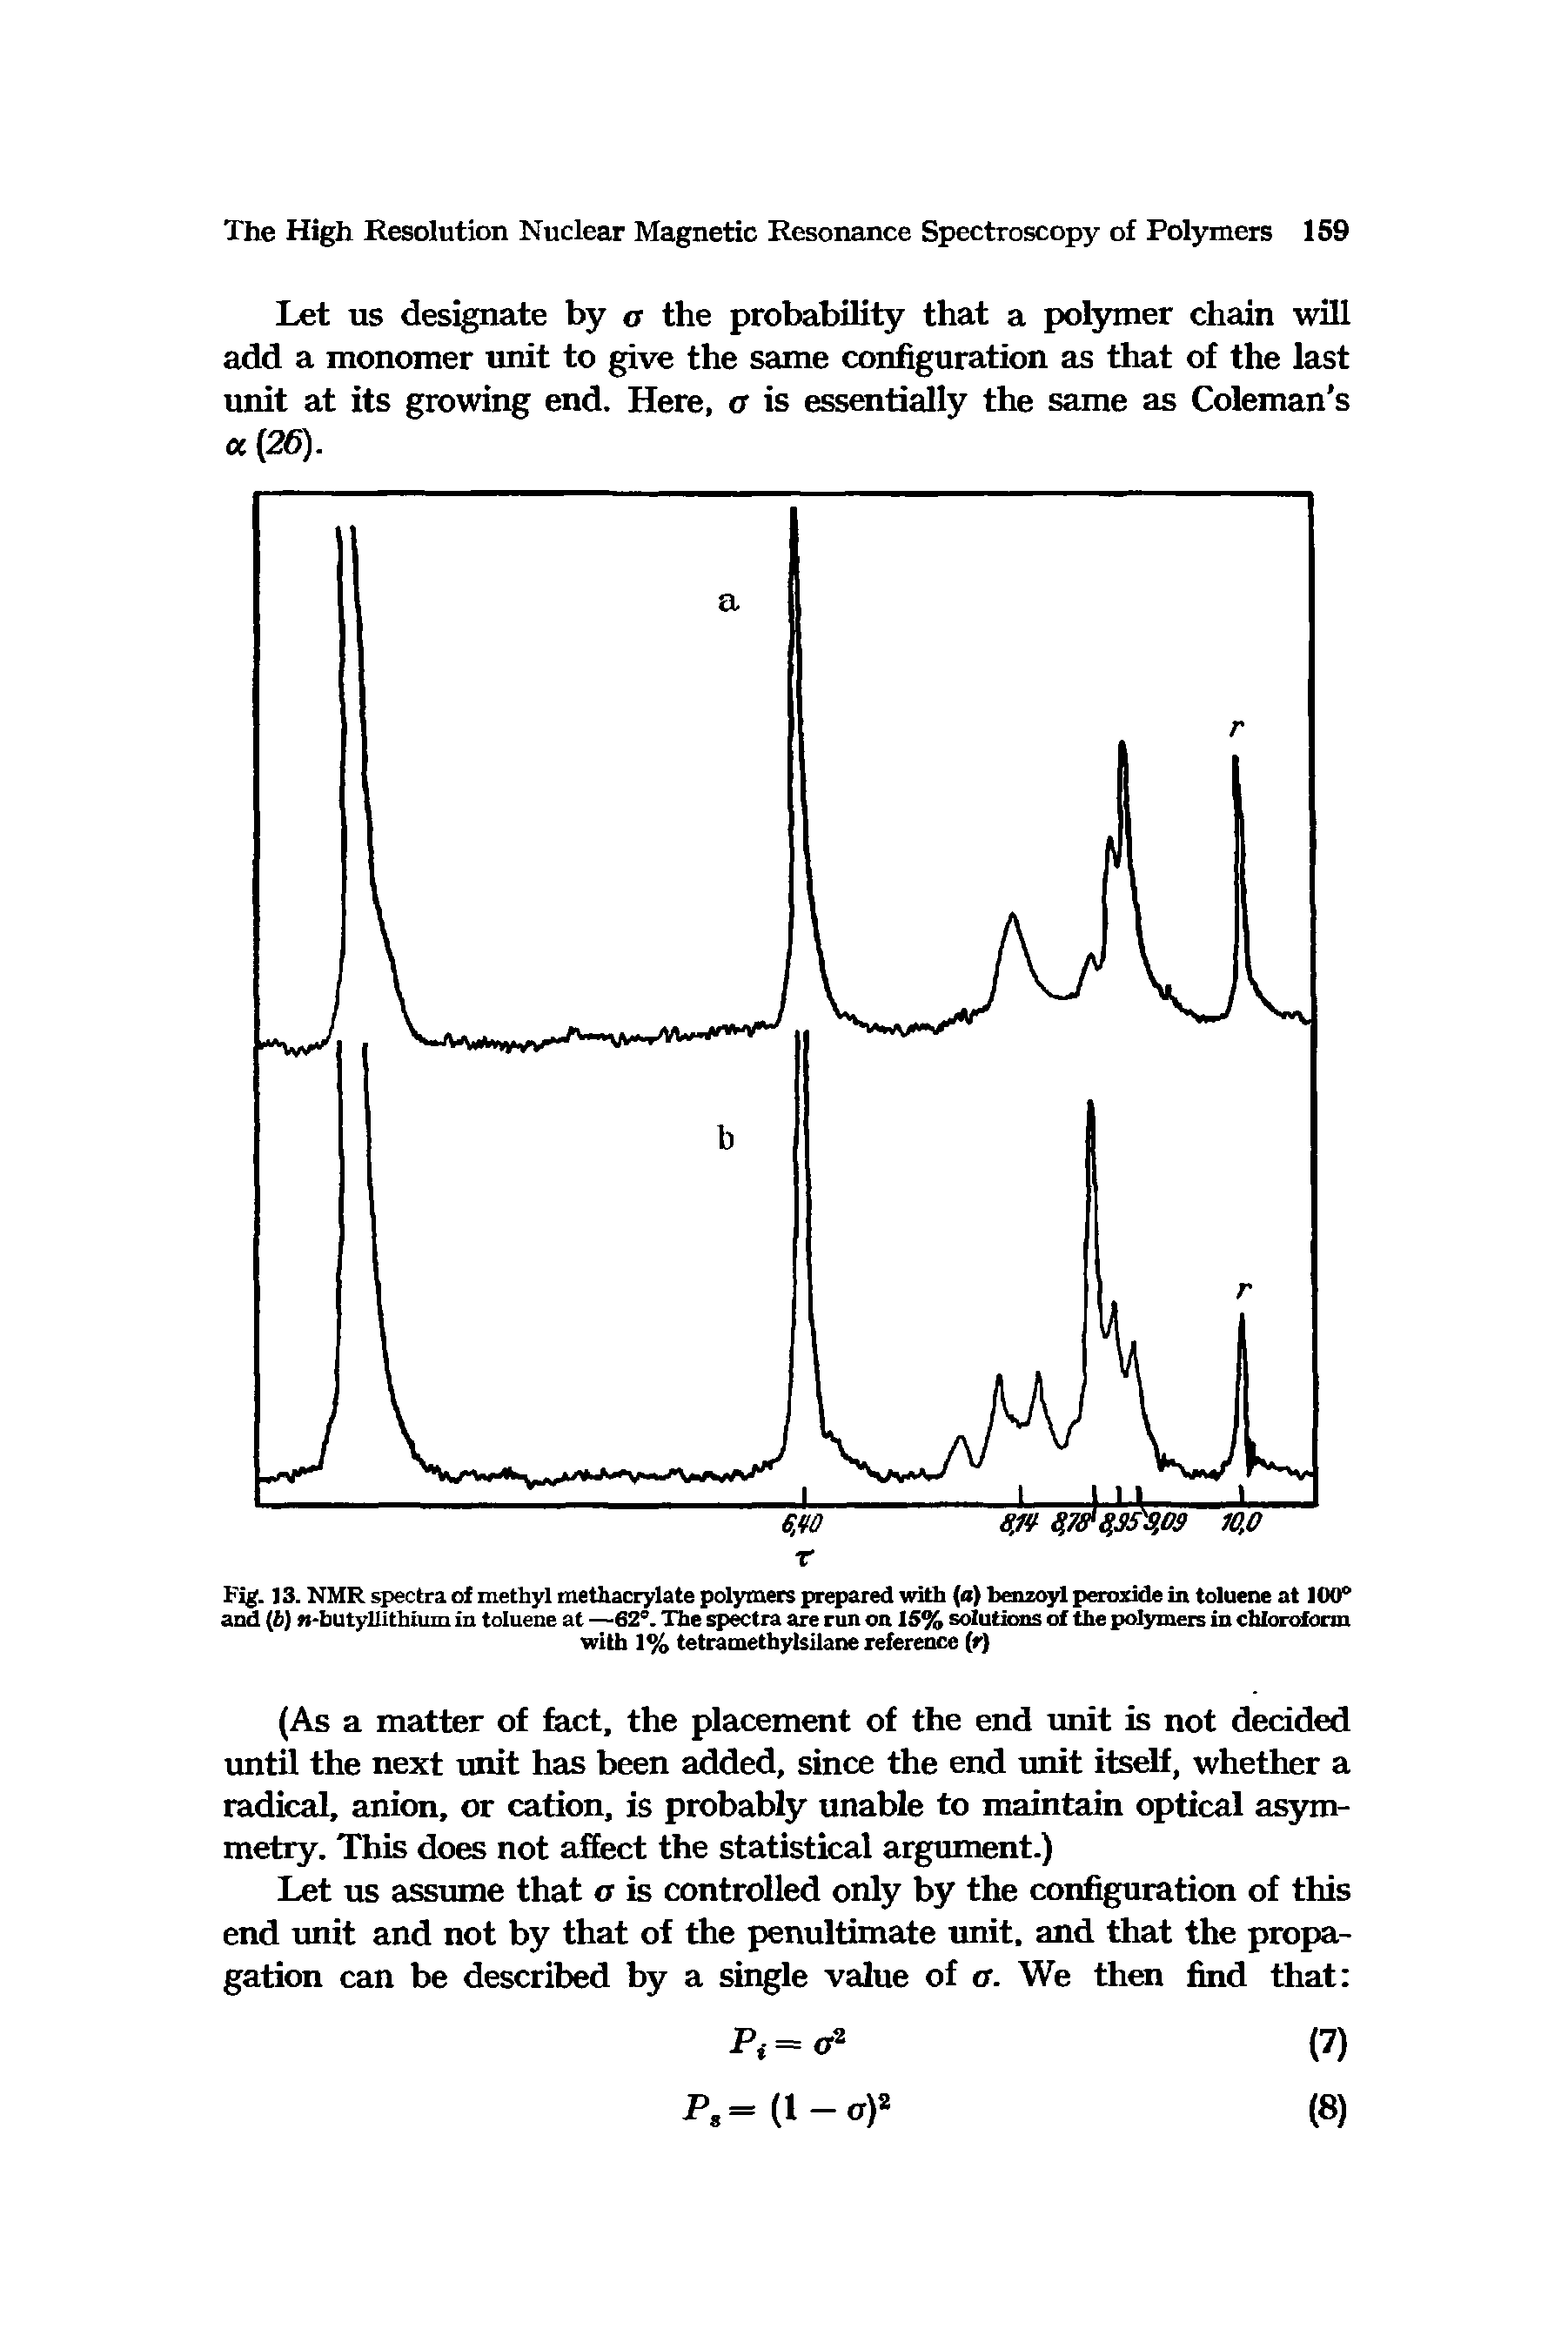 Fig. ]3. NMR spectra of methyl methacrylate polymers prepared with (a) benzoyl peroxide in toluene at 100° and (i6J w-butyllithhim in toluene at —62°. The spectra are run on 15% solutions of the polymers in chloroform with 1% tetramethylsilane reference (r)...